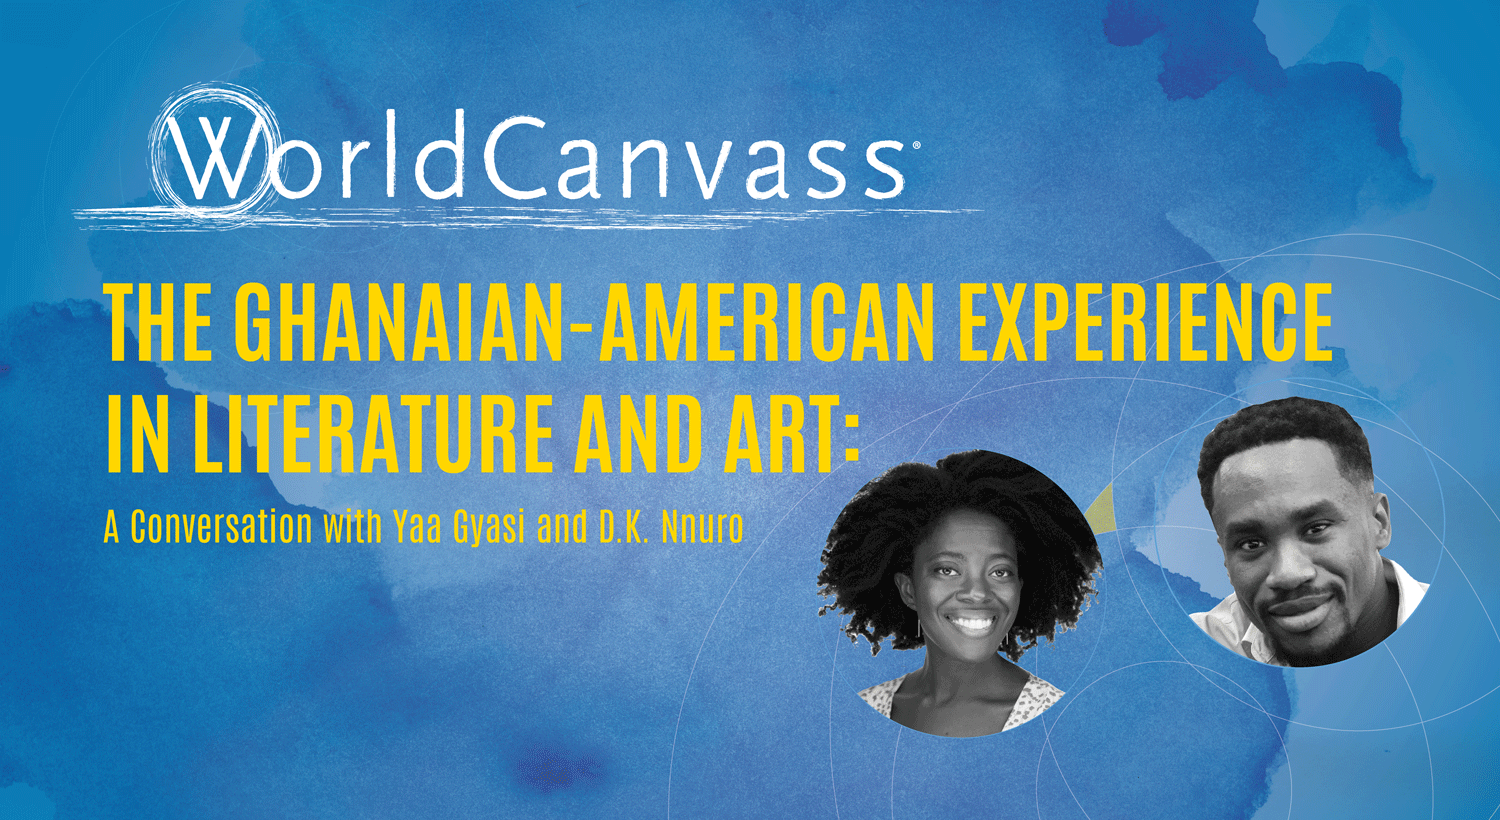 WorldCanvass - The Ghanaian-American Experience in Literature and Art: A Conversation with Yaa Gyasi and D.K. Nnuro